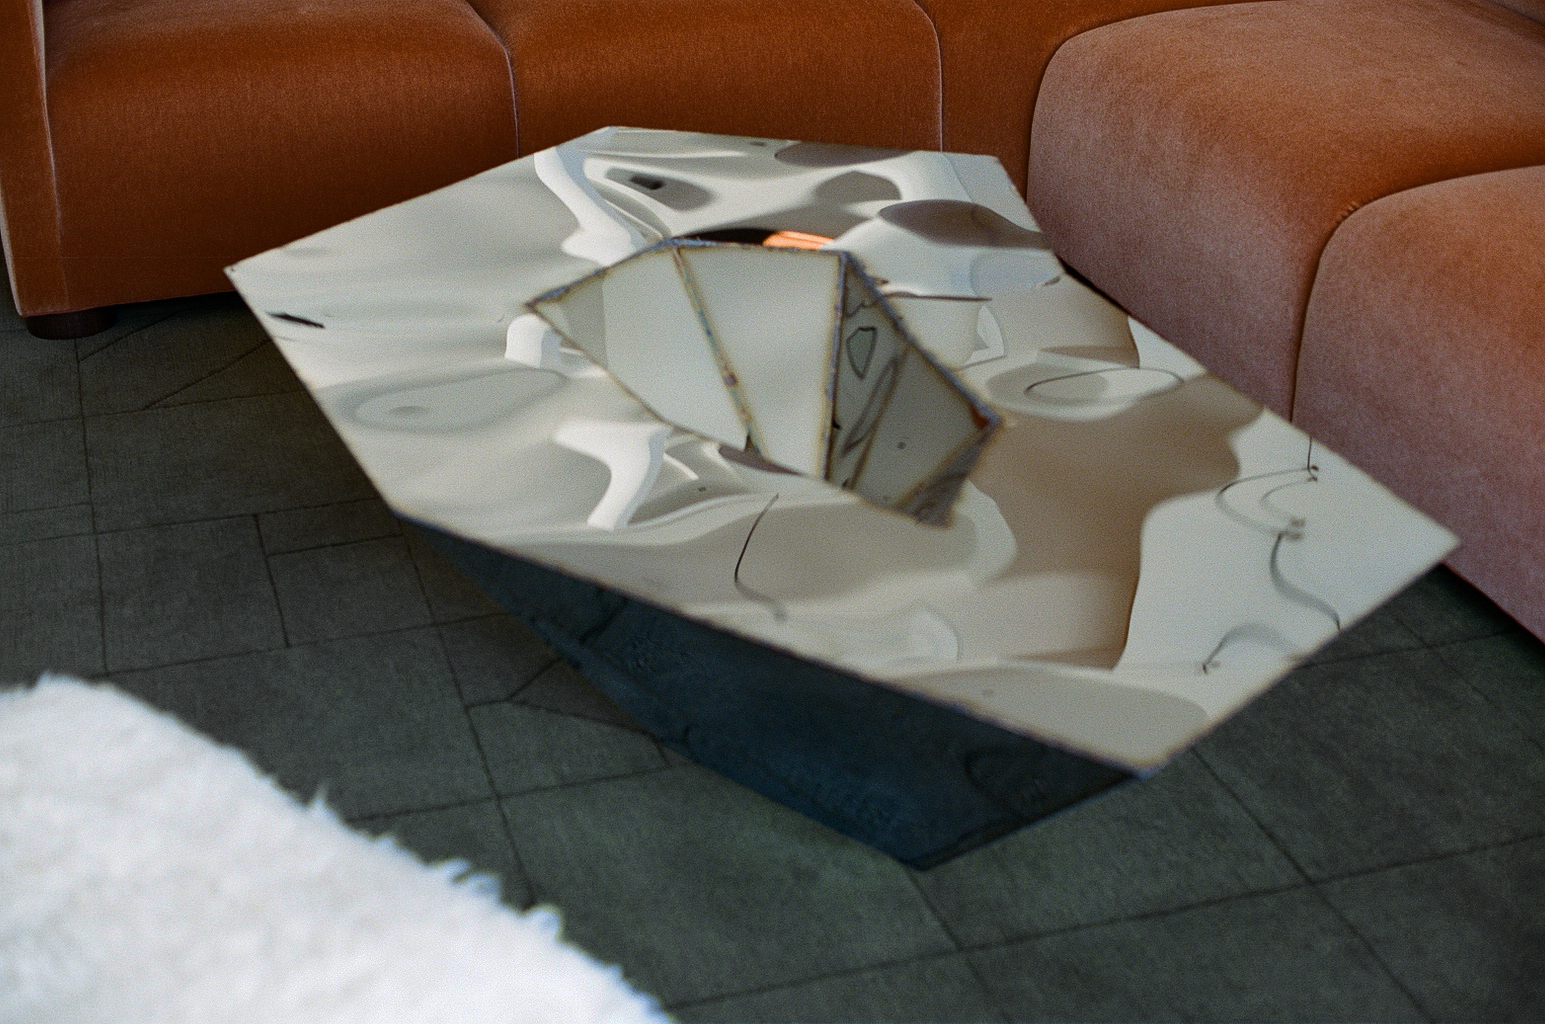 Julian Mayor’s Lunar Table, 2013, in mirror polished stainless steel alights a custom Chroma wool rug by Mark Nelson.